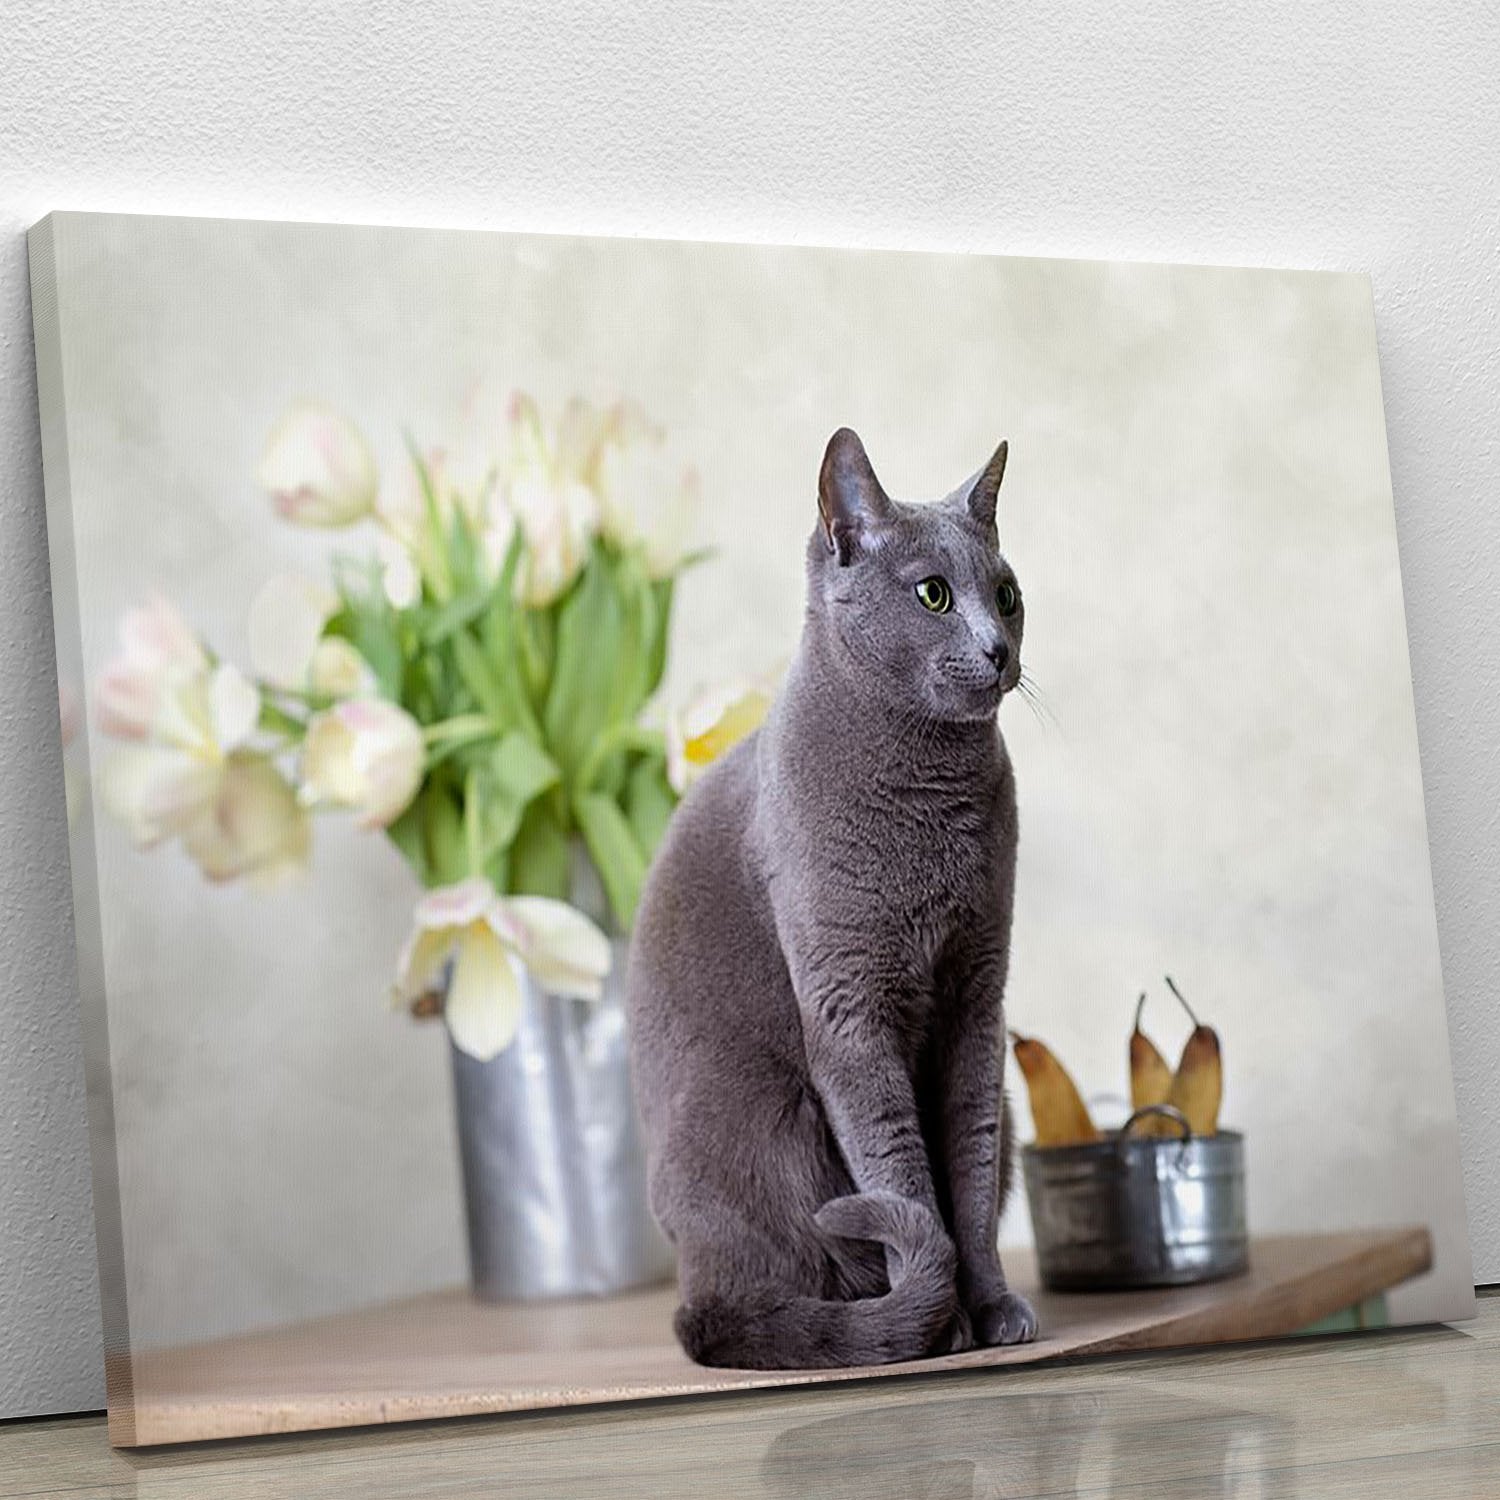 Russian Blue cat sitting on table with pears and tulips Canvas Print or Poster